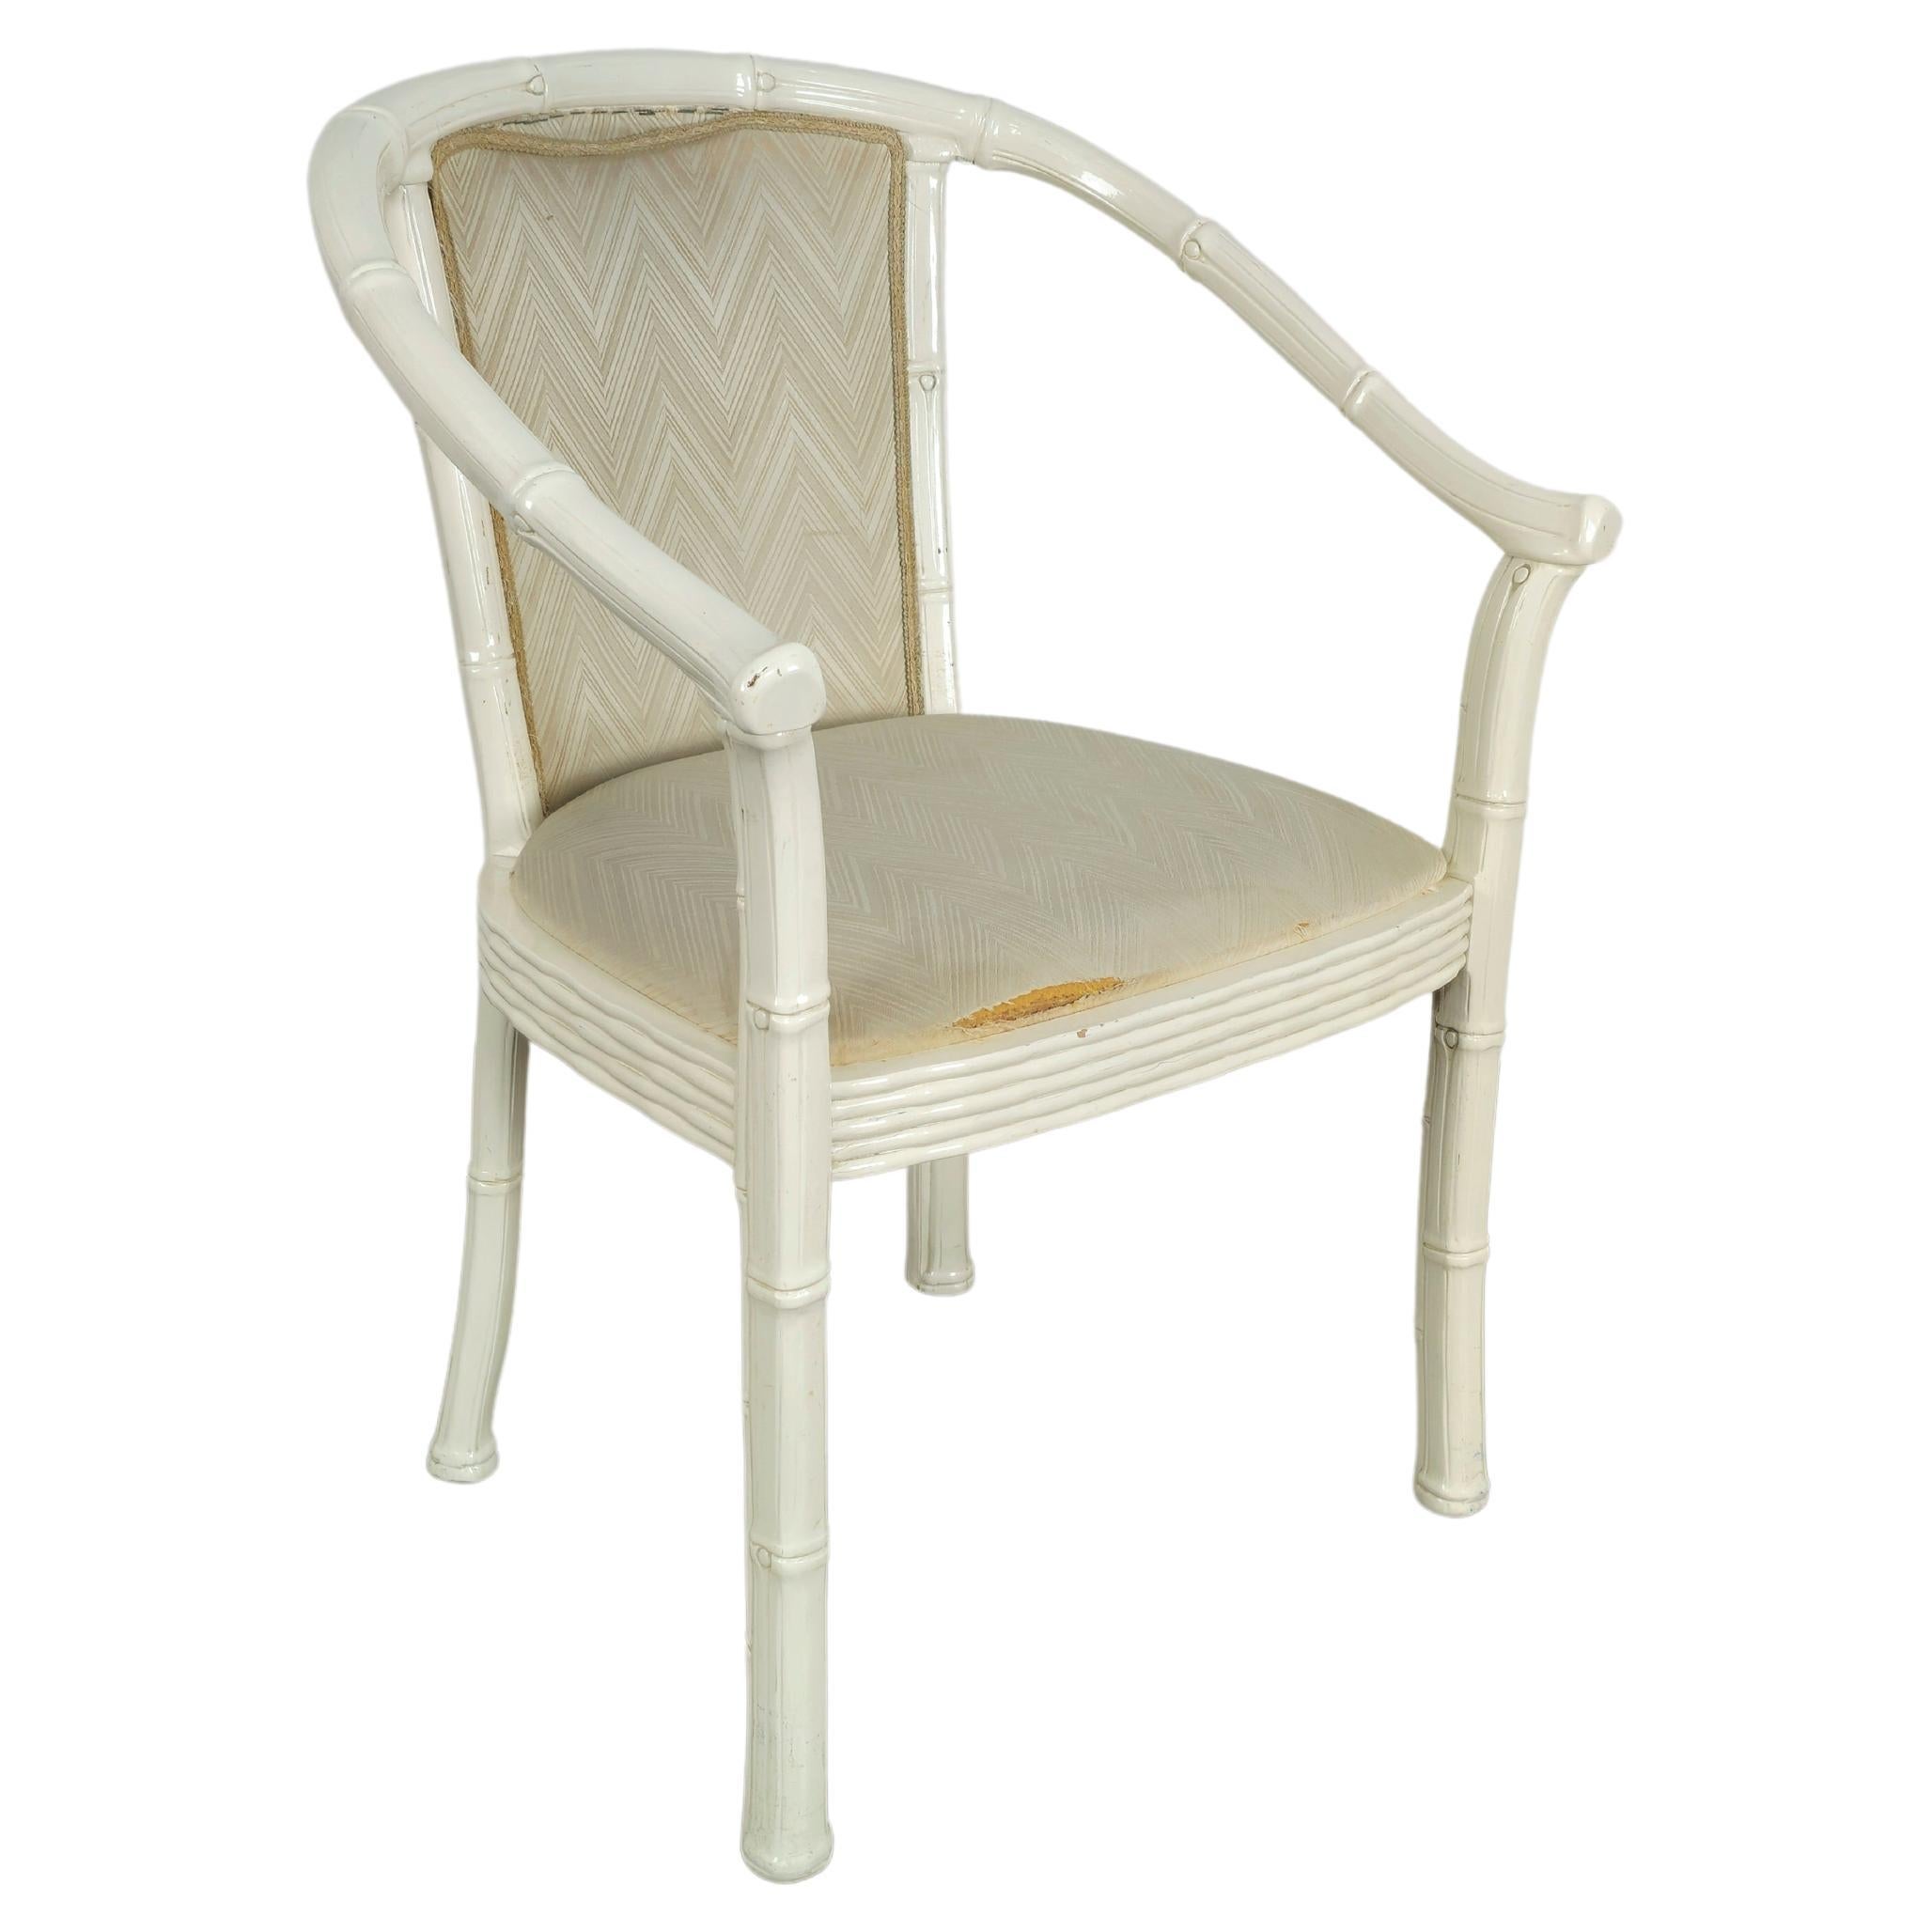 Midcentury Chair White Enamelled Bamboo Fabric Italian Design, 1960s For Sale